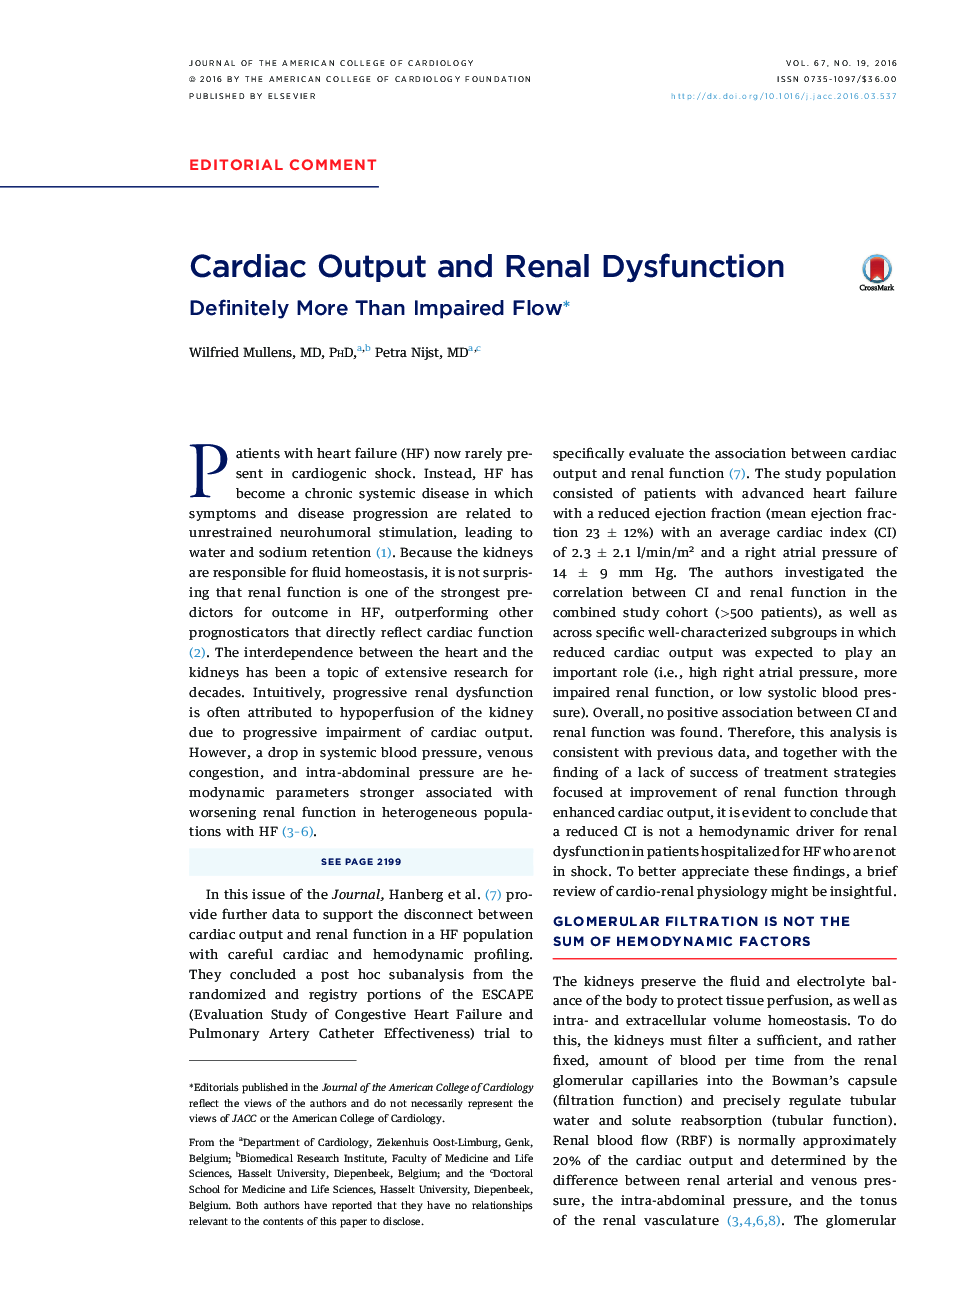 Cardiac Output and Renal Dysfunction